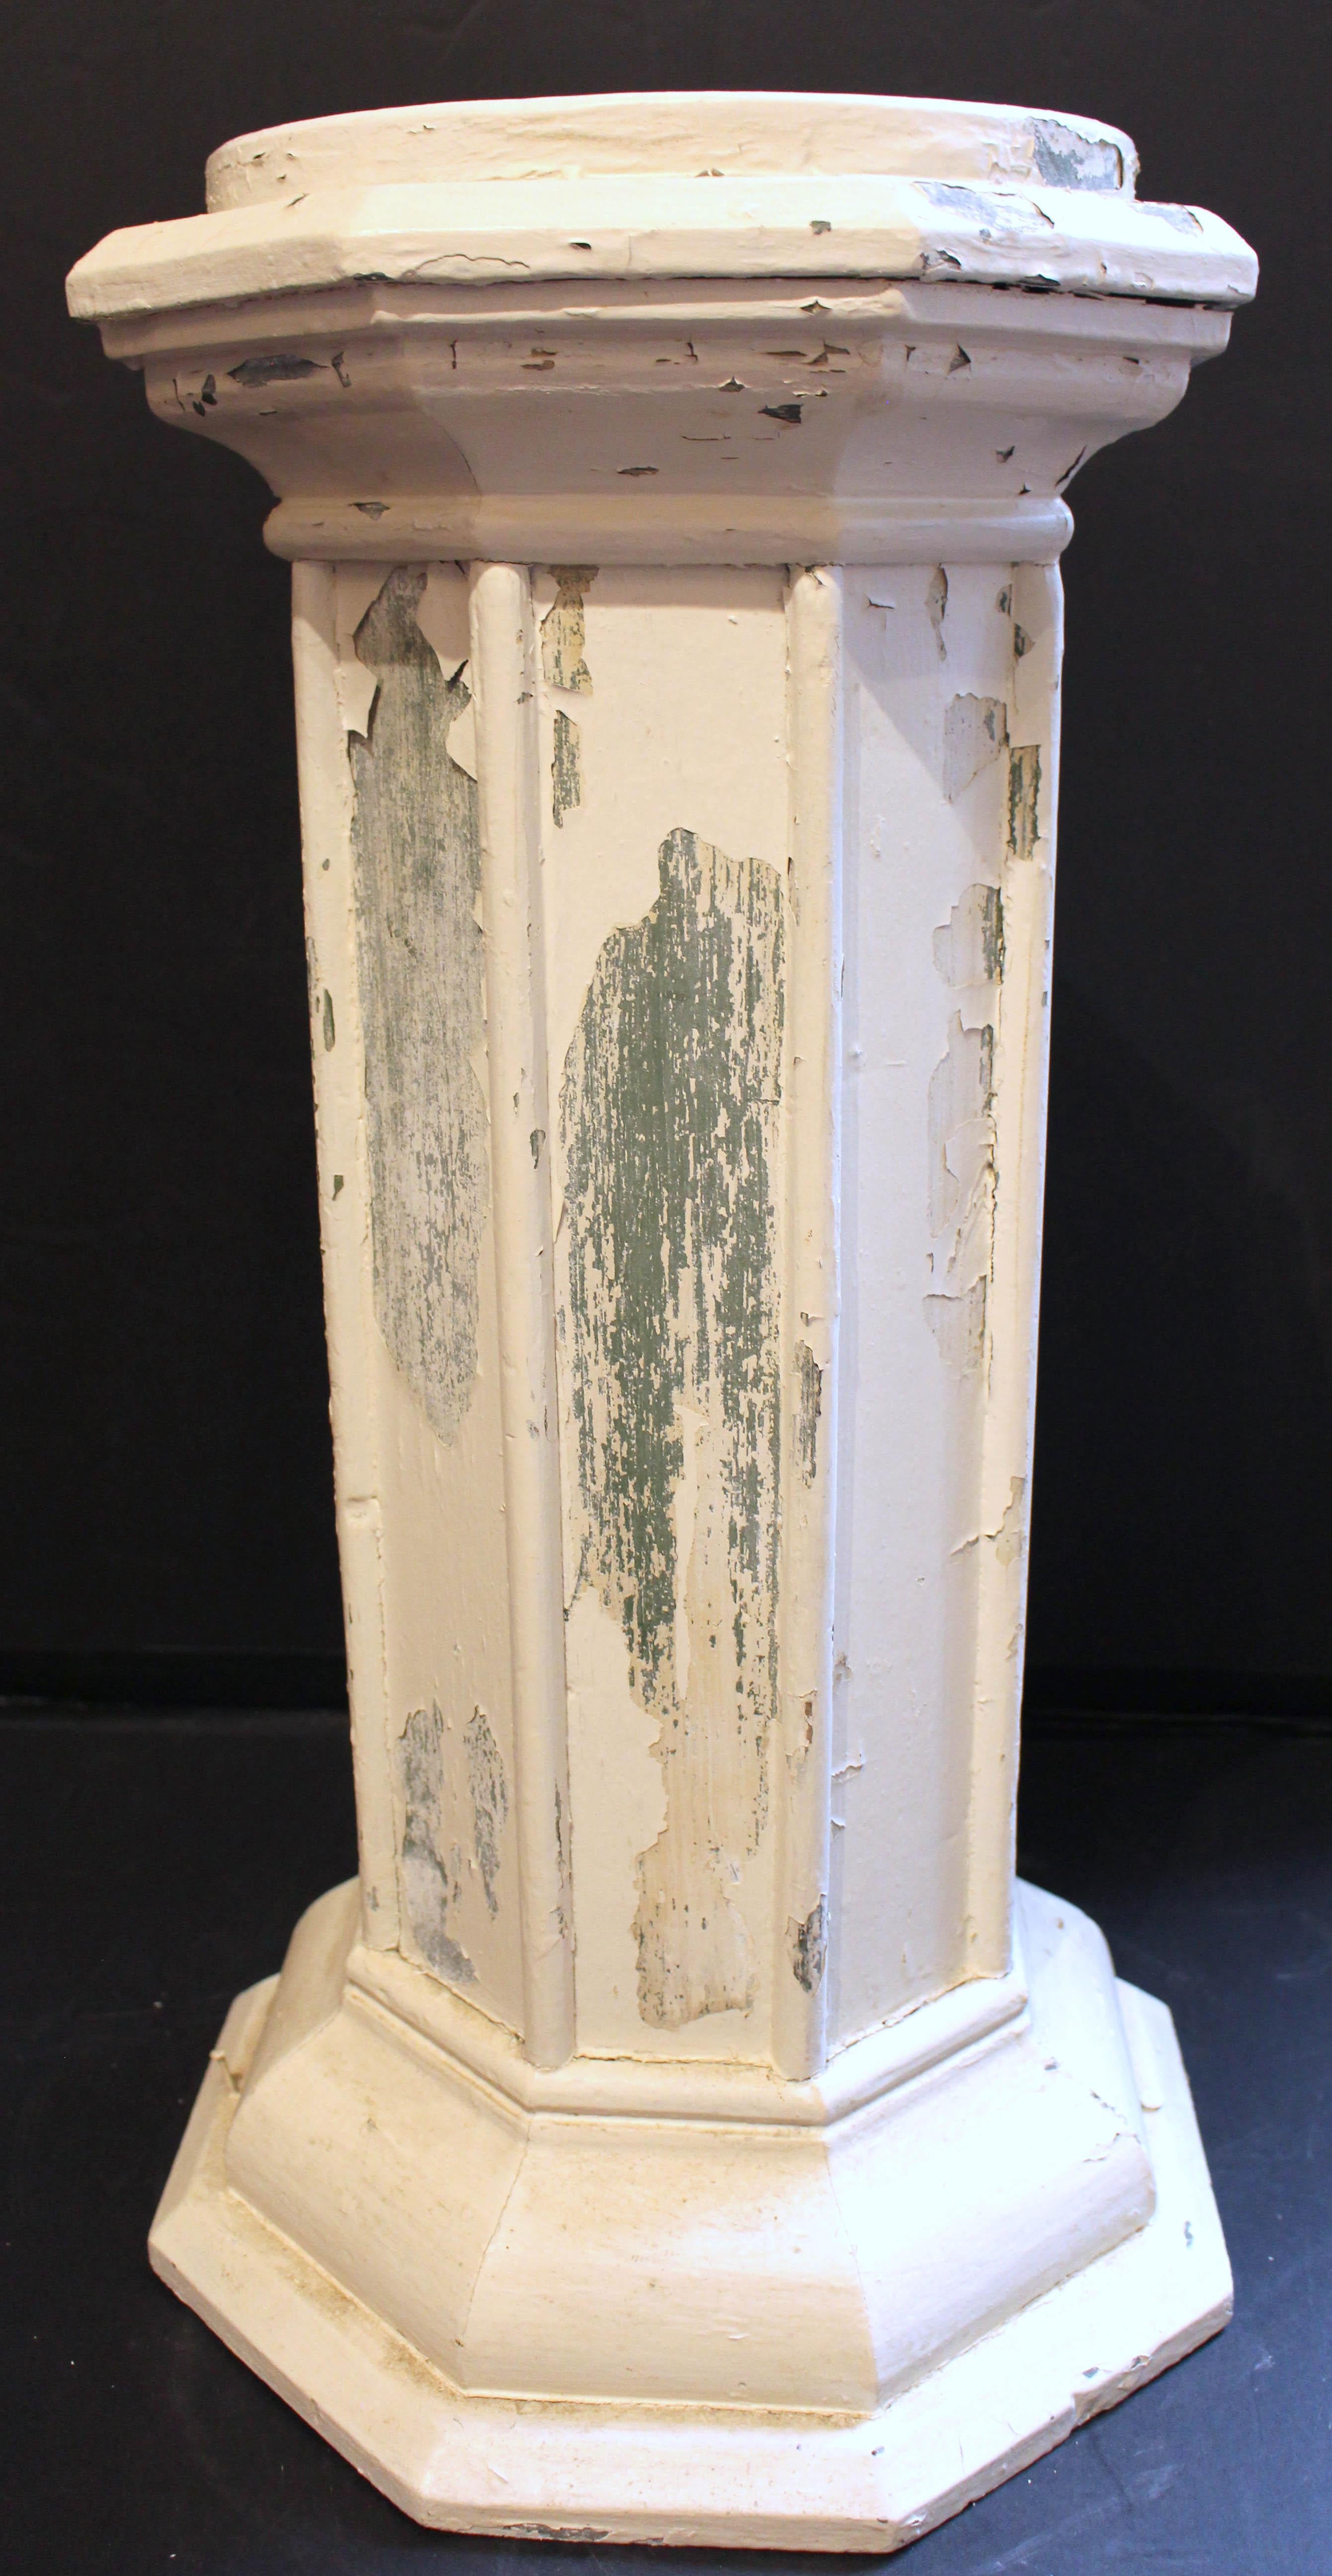 Wooden octagonal form display column pedestal, vintage, American. Charming layers of old, worn paint. Nicely molded.
12